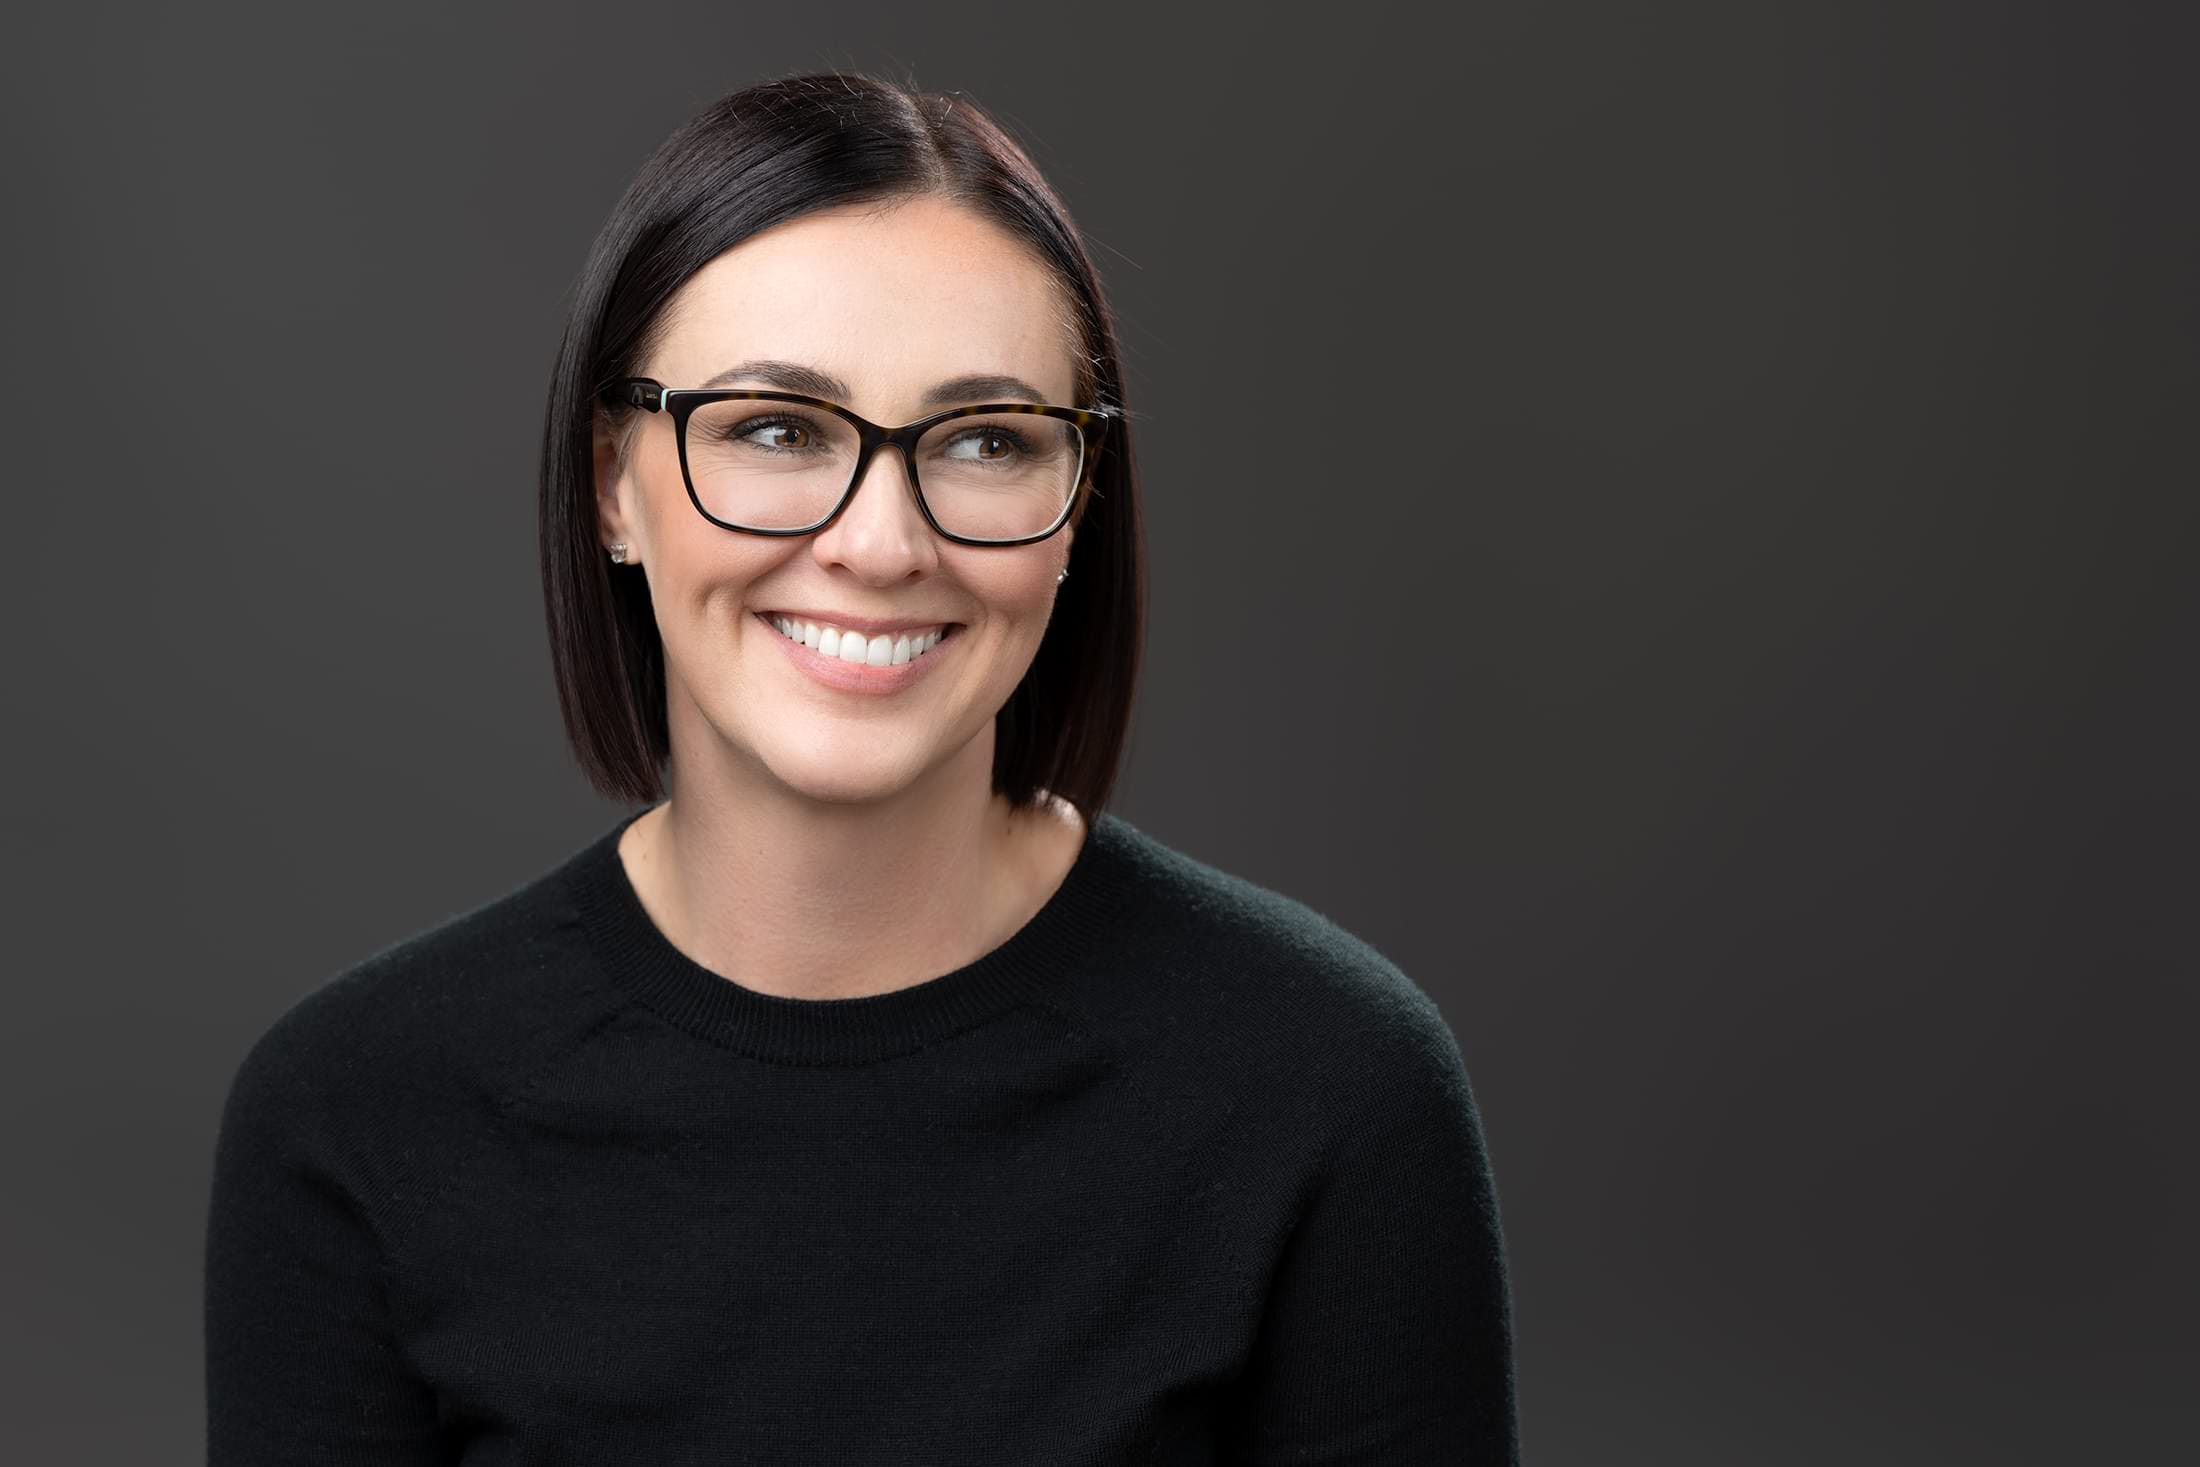 A woman with glasses helping your company grow through headshots.